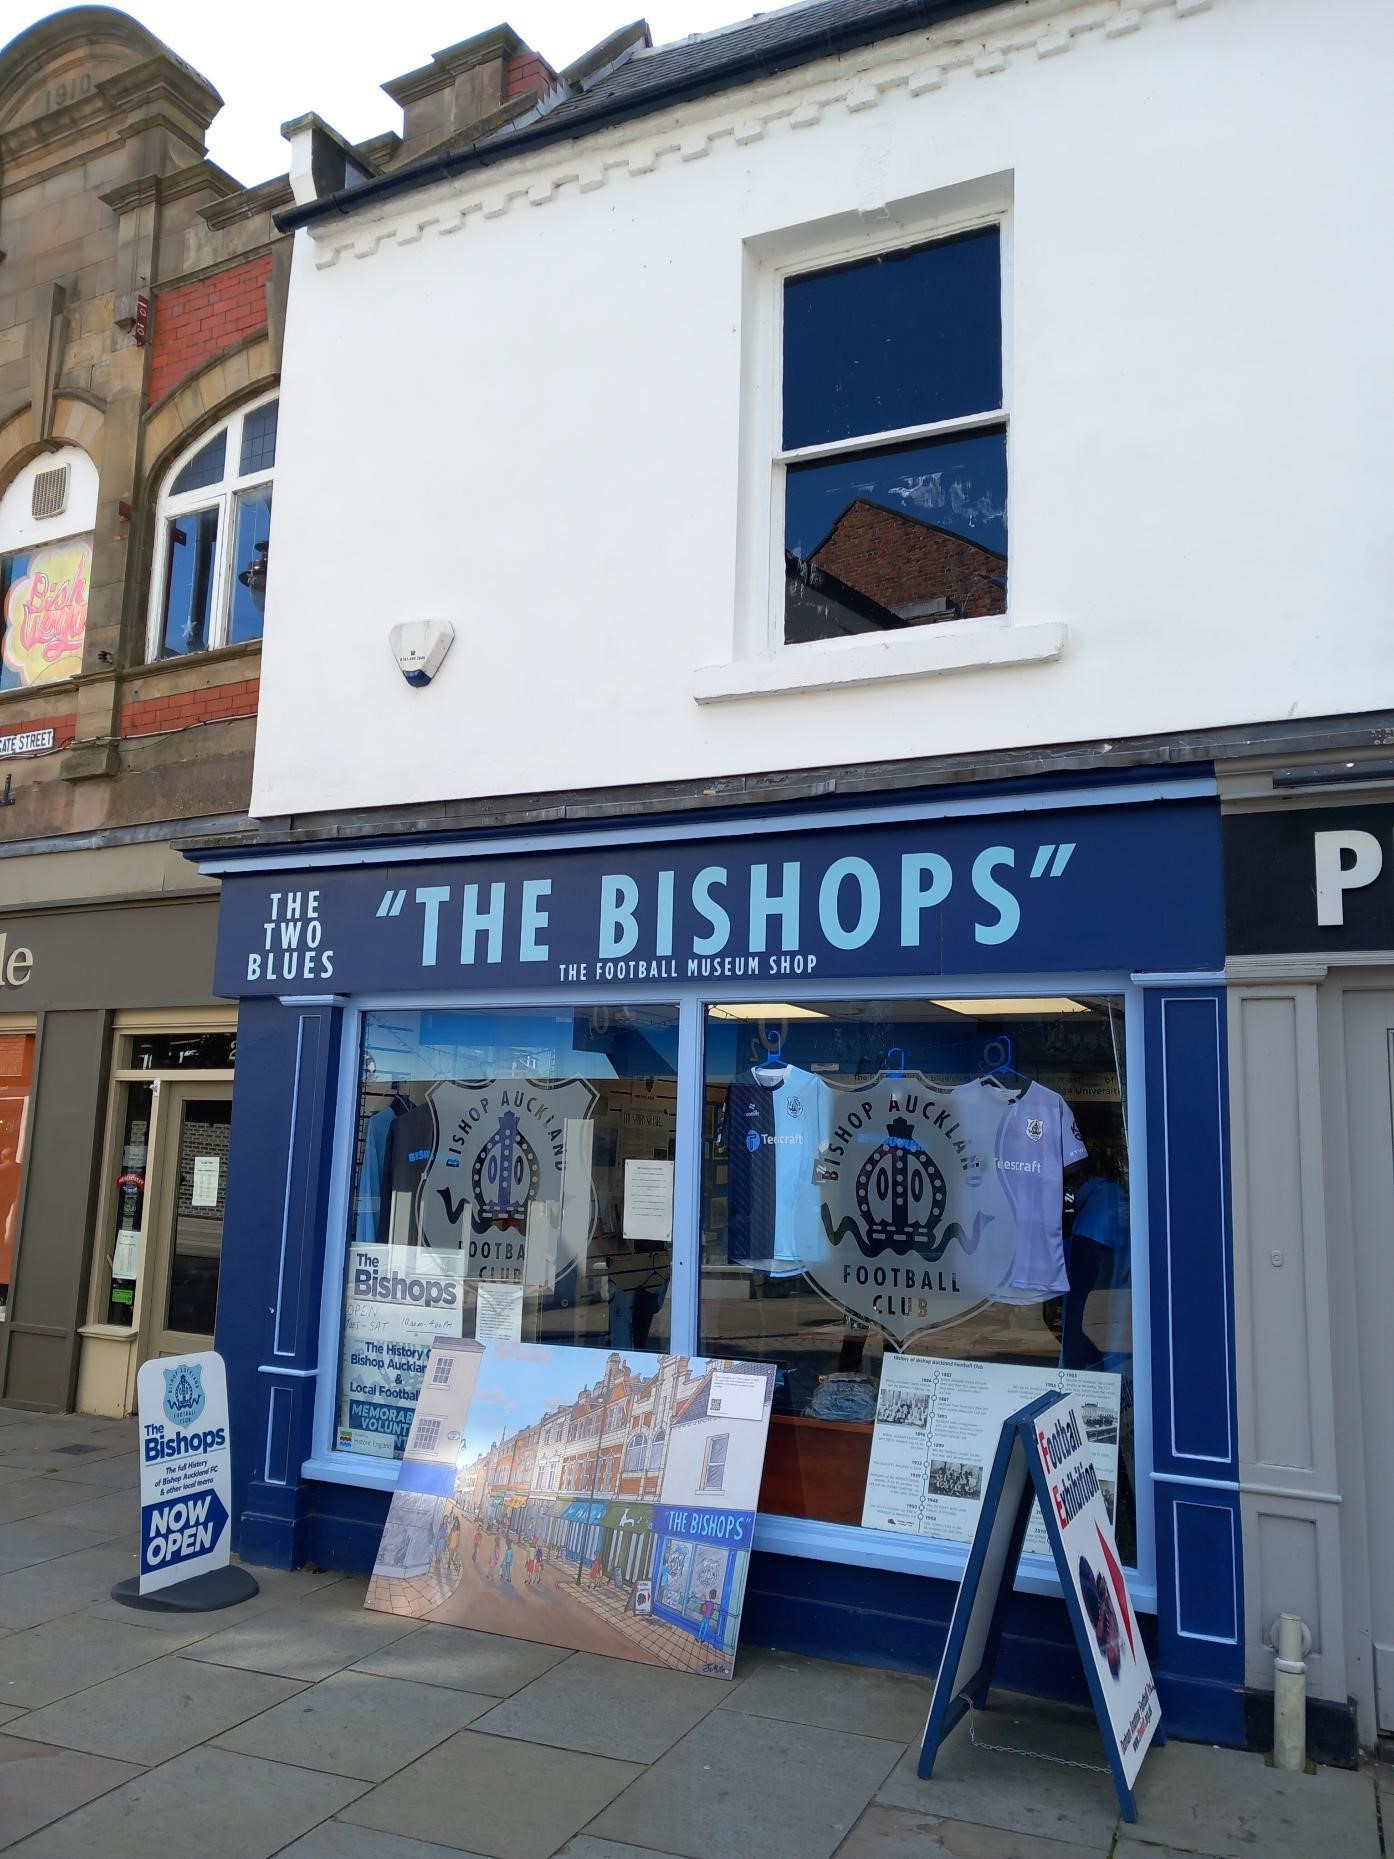 The Bishops shopfront with signs on the window advertising Bishop Auckland Football Club and the football exhibition inside 